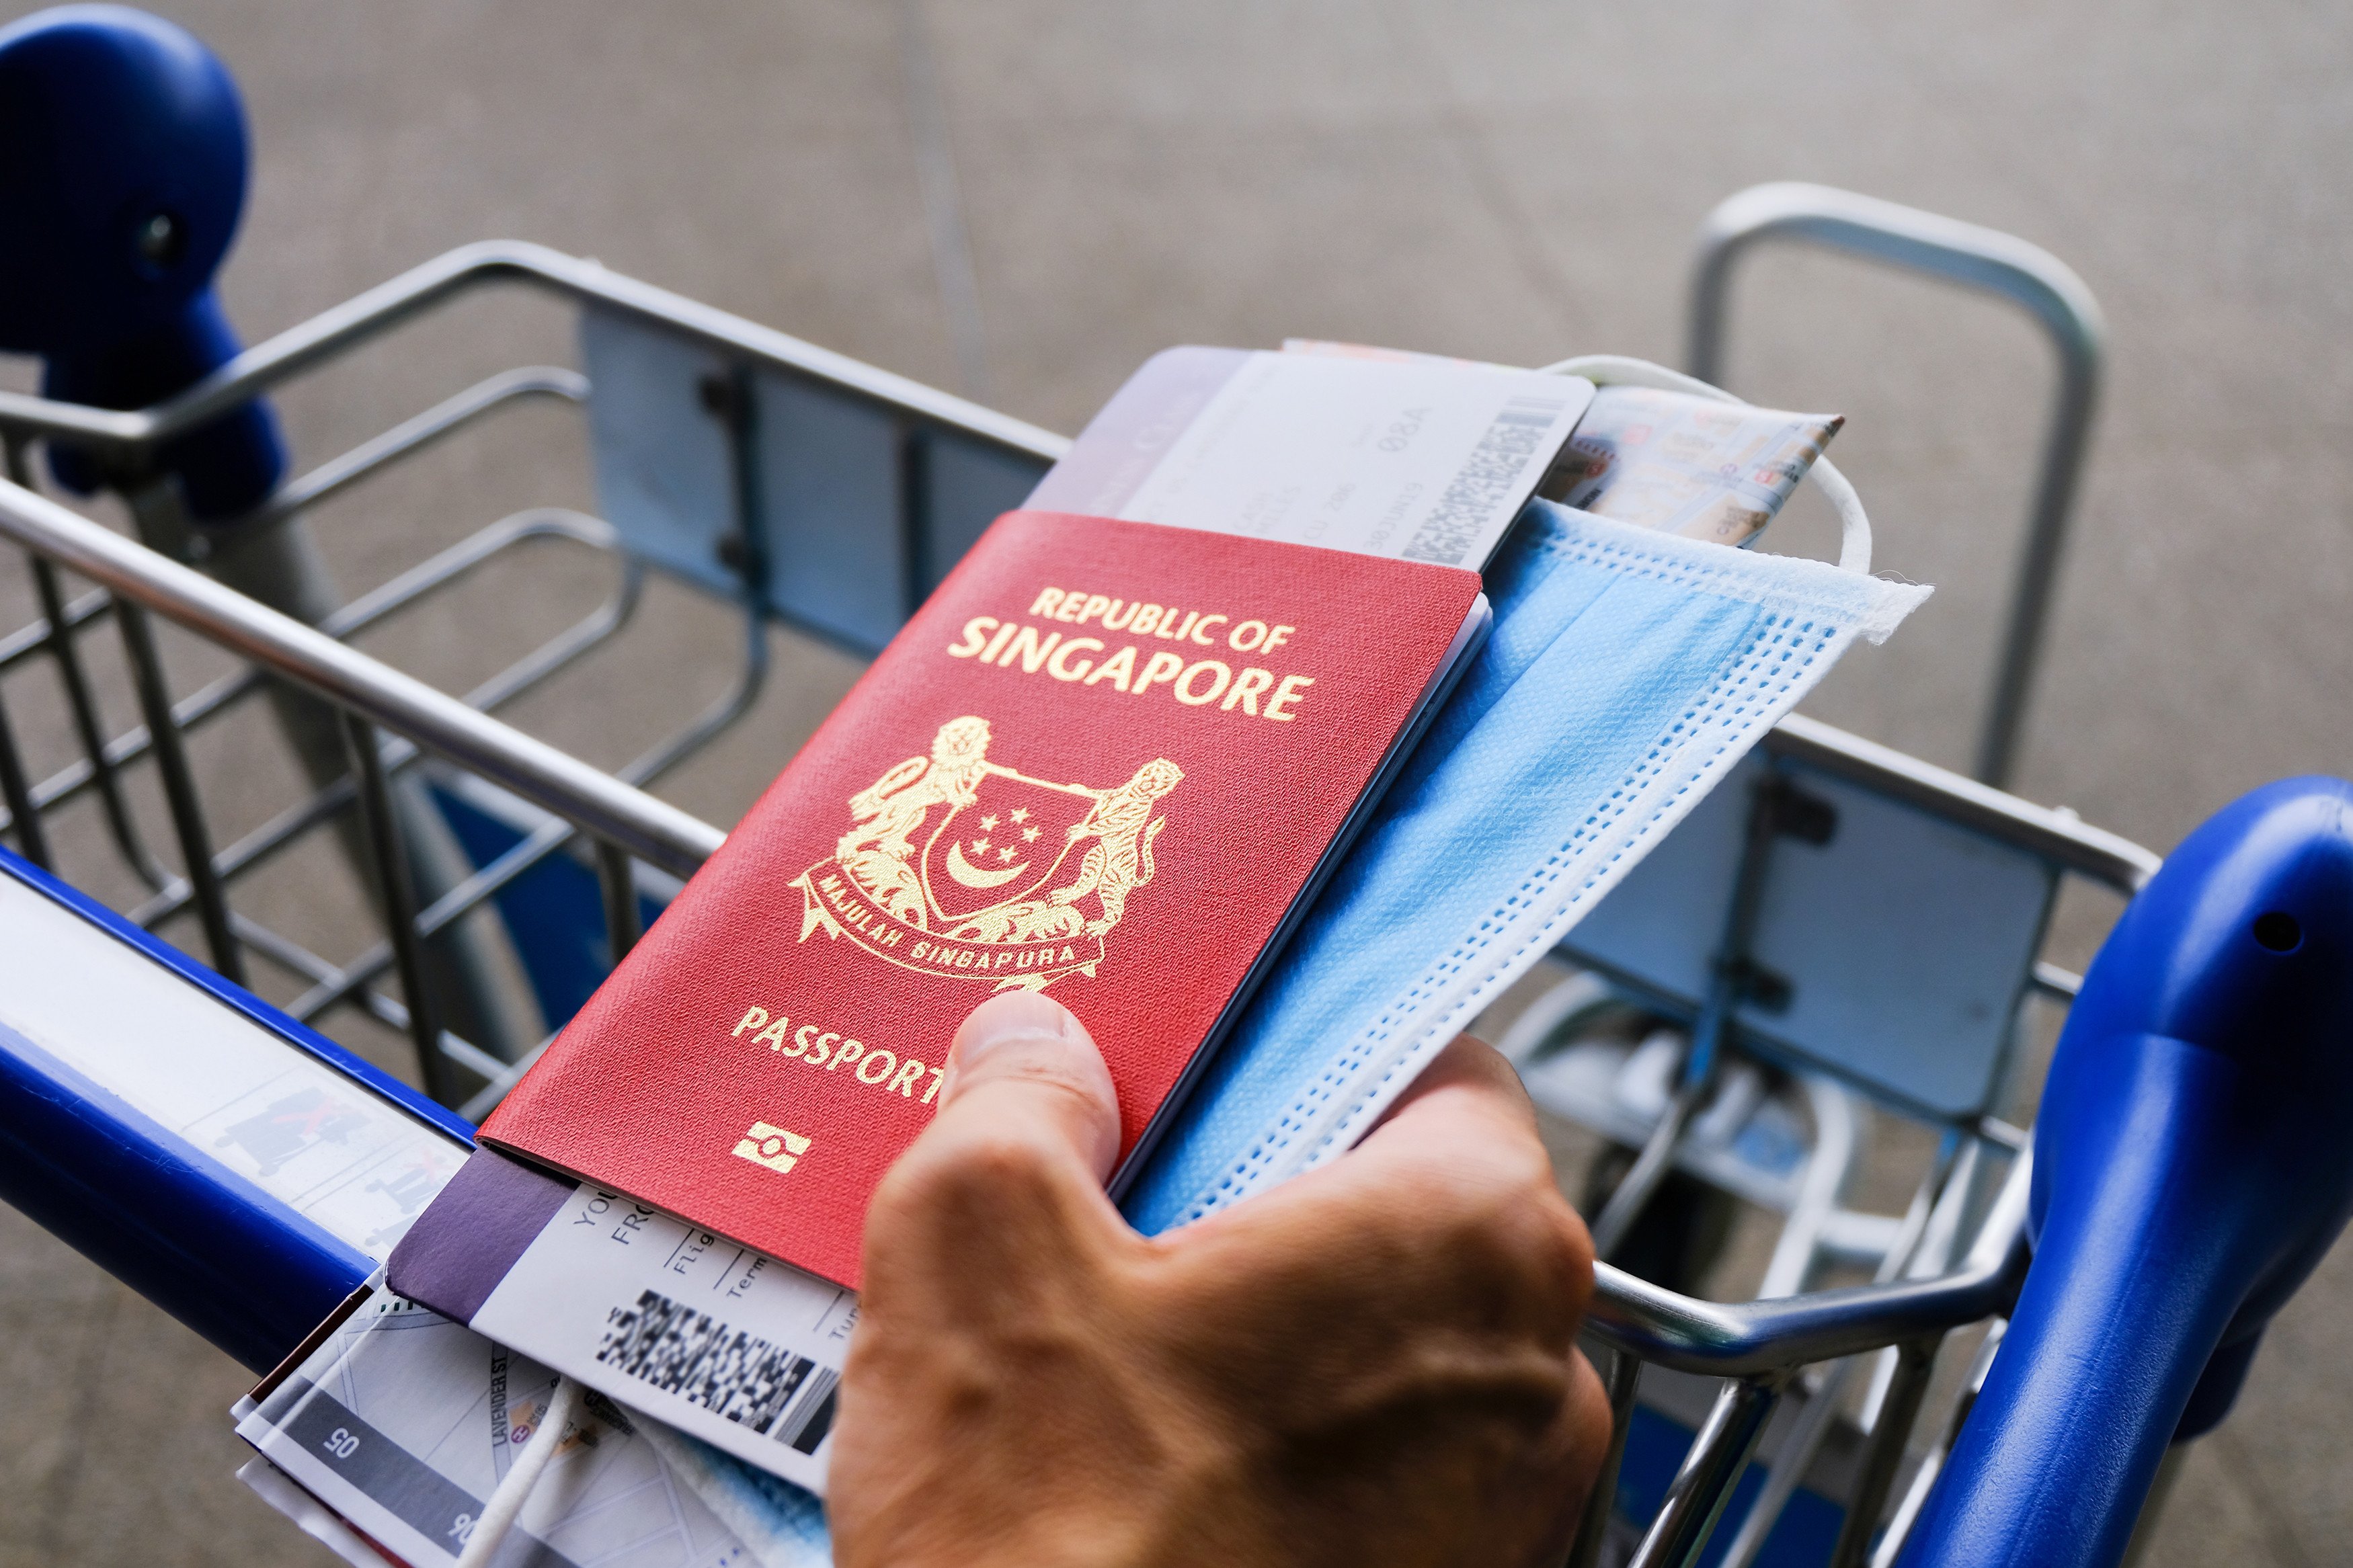 People travelling on passports issued by Singapore are at a disadvantage compared to those from many other countries because the document does not explicitly differentiate between first and last names, yet airport systems do. Photo: Shutterstock Images